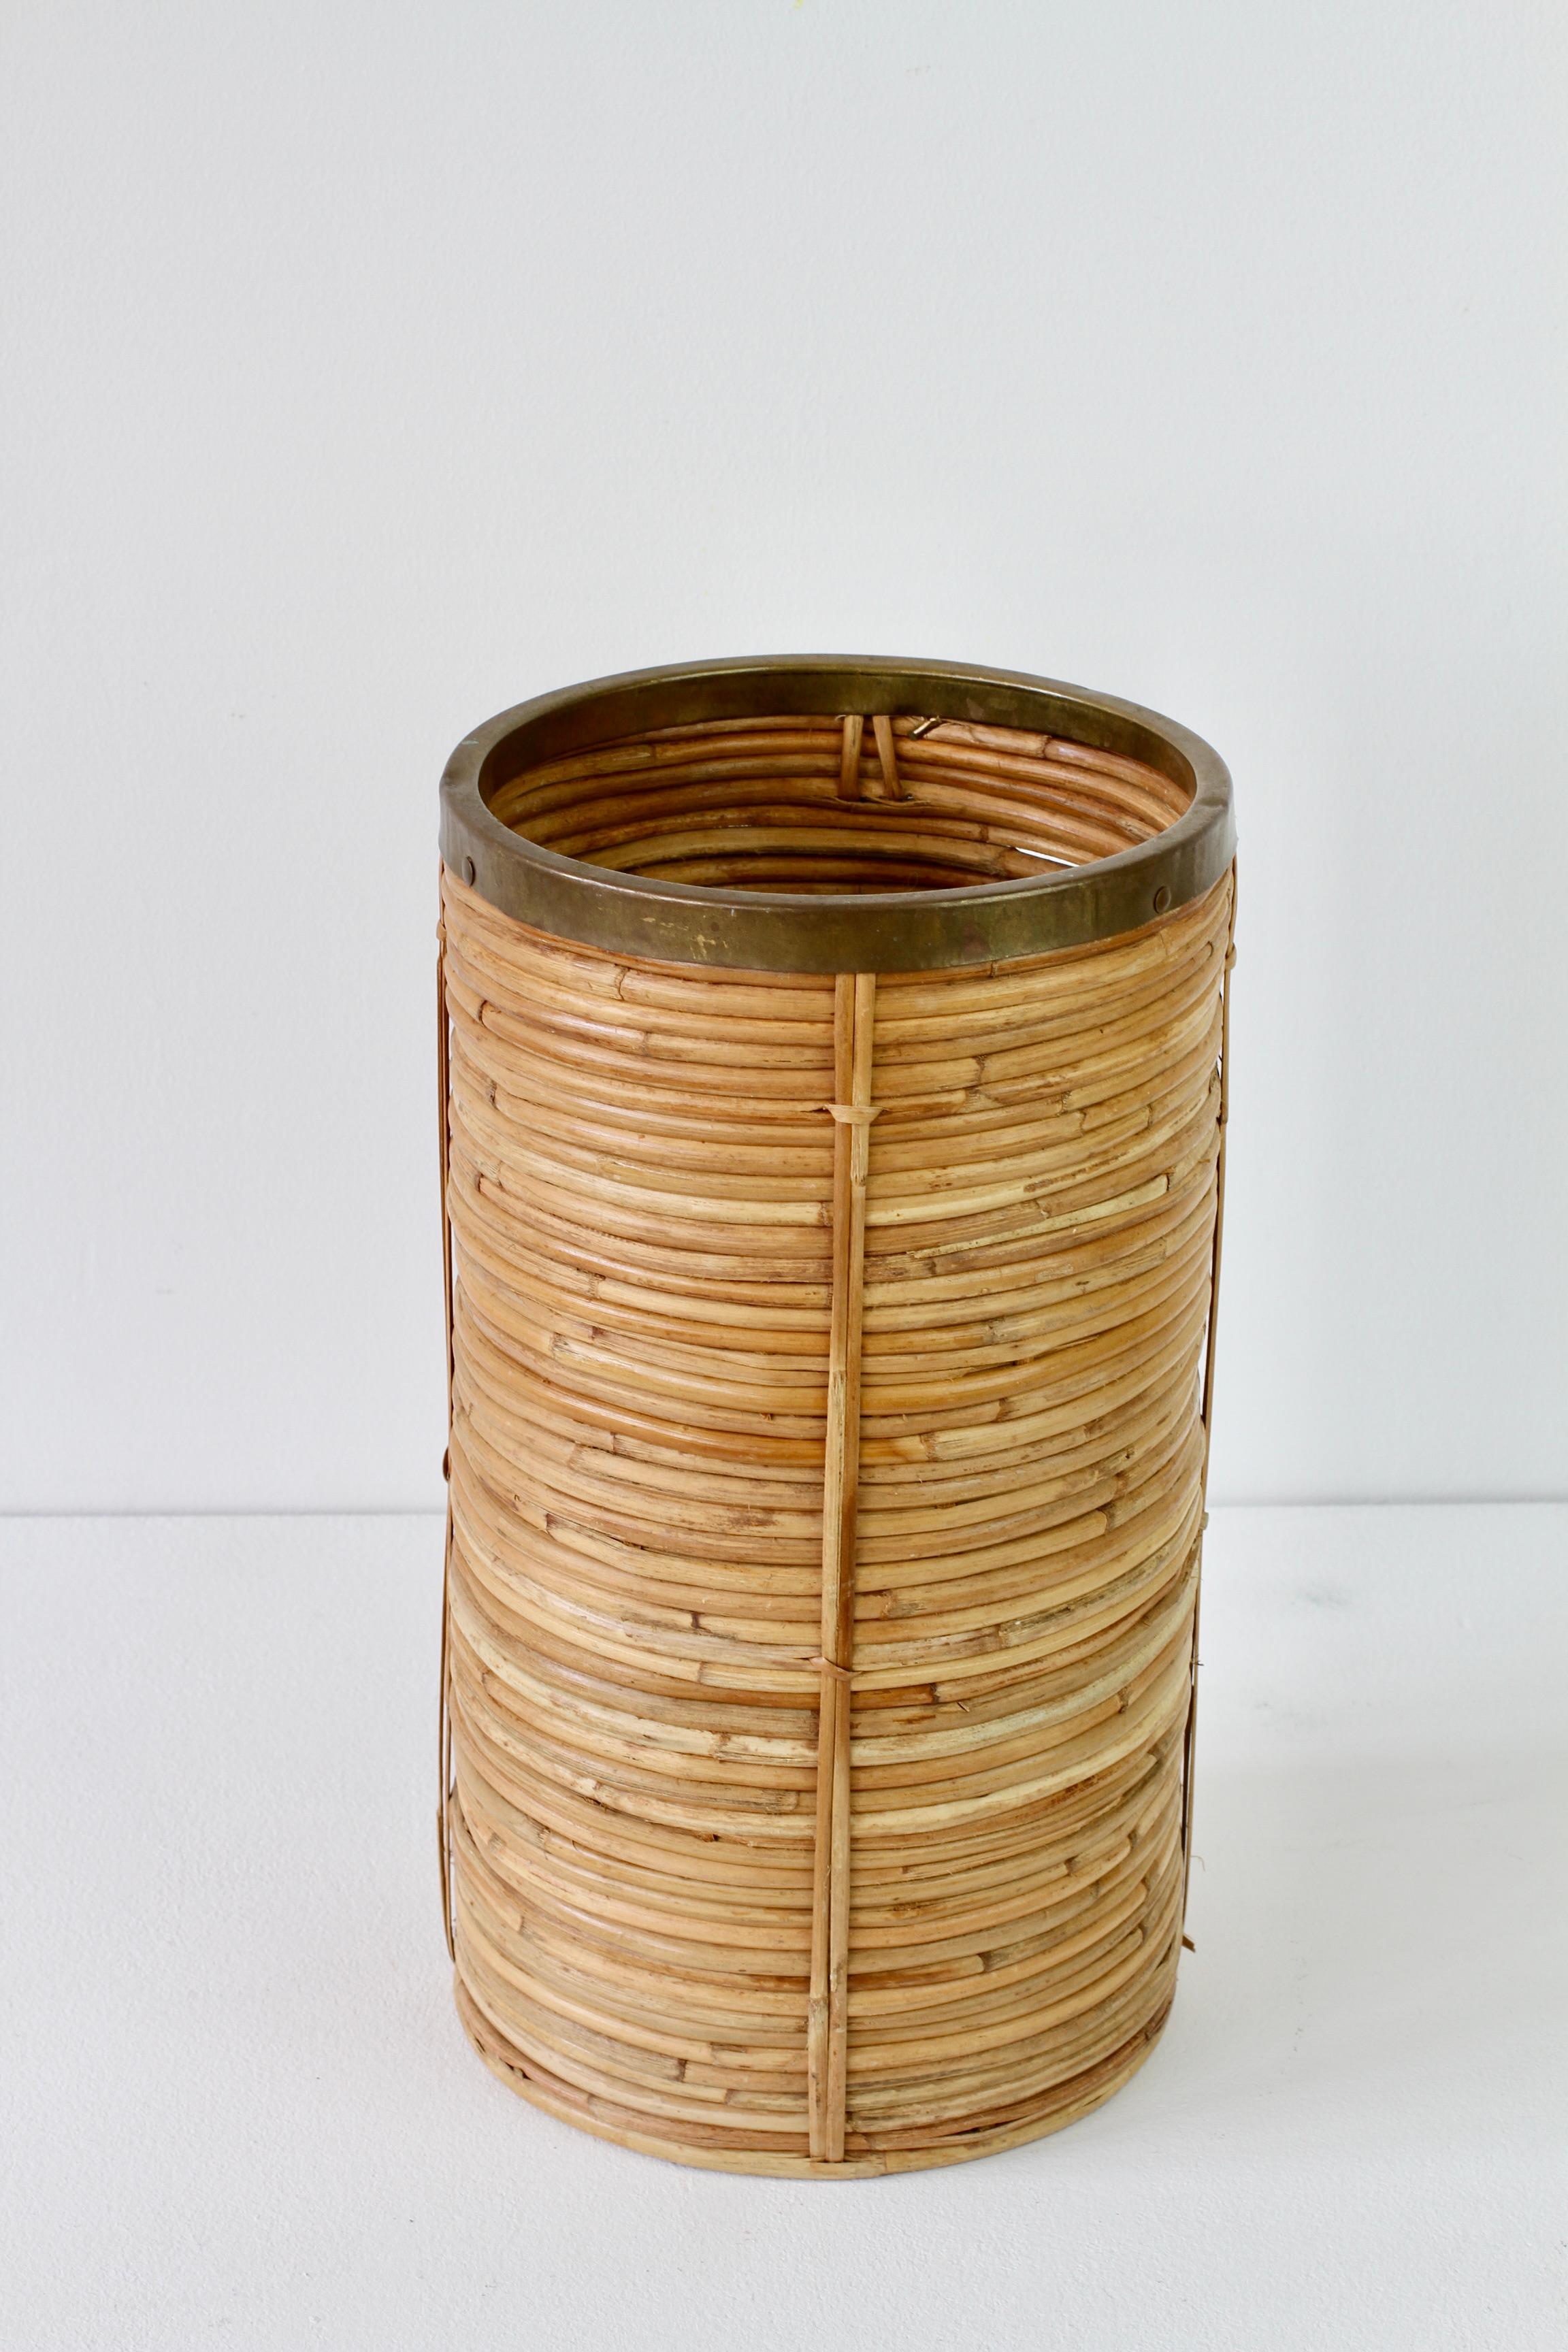 Hollywood Regency 1970s Vintage Mid-Century Italian Bamboo Waste Paper Basket or Umbrella Stand